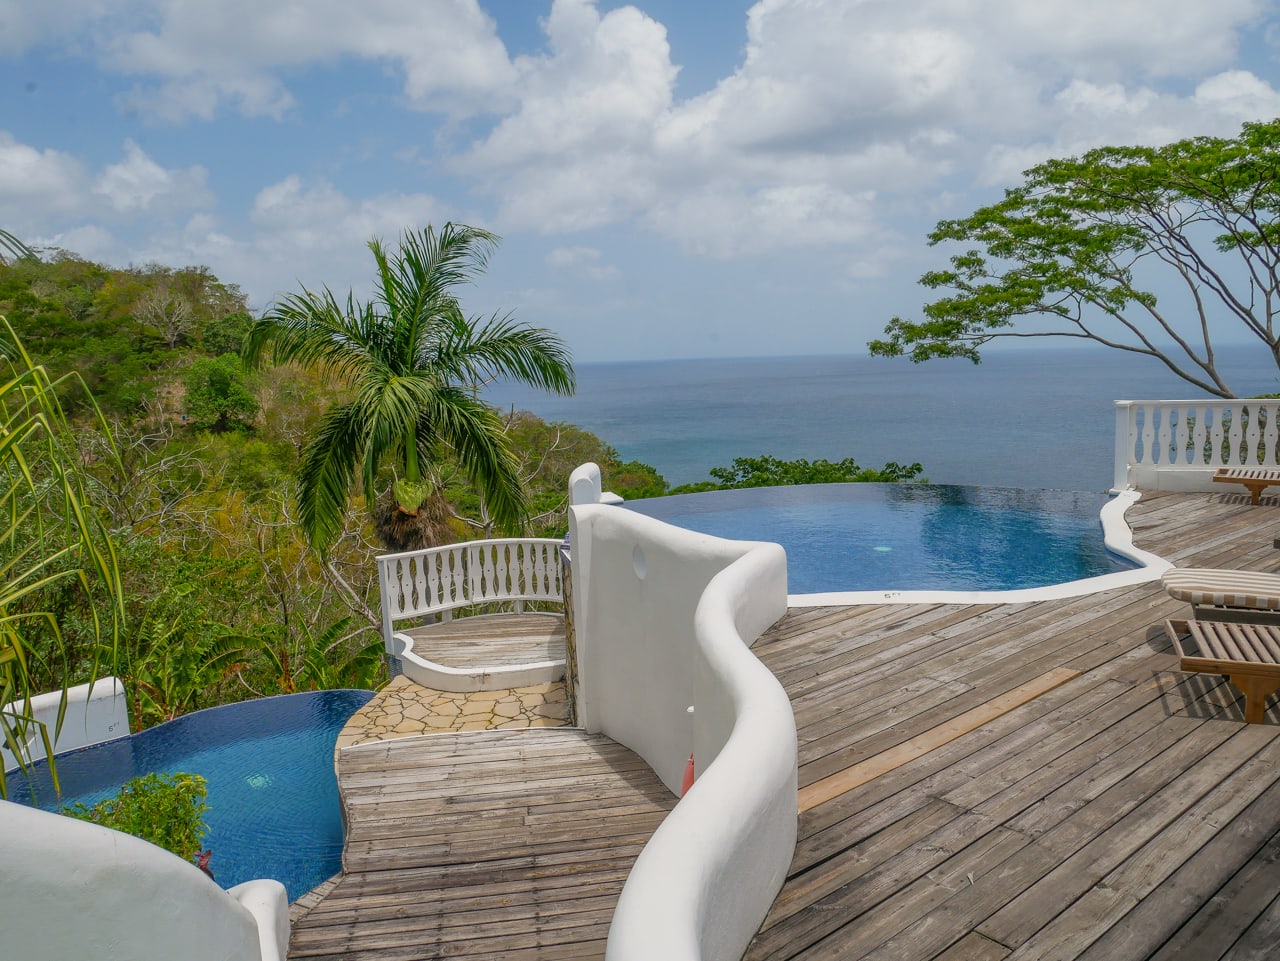 Grenada Hotels: 7 Places to Stay to Suit All Budgets